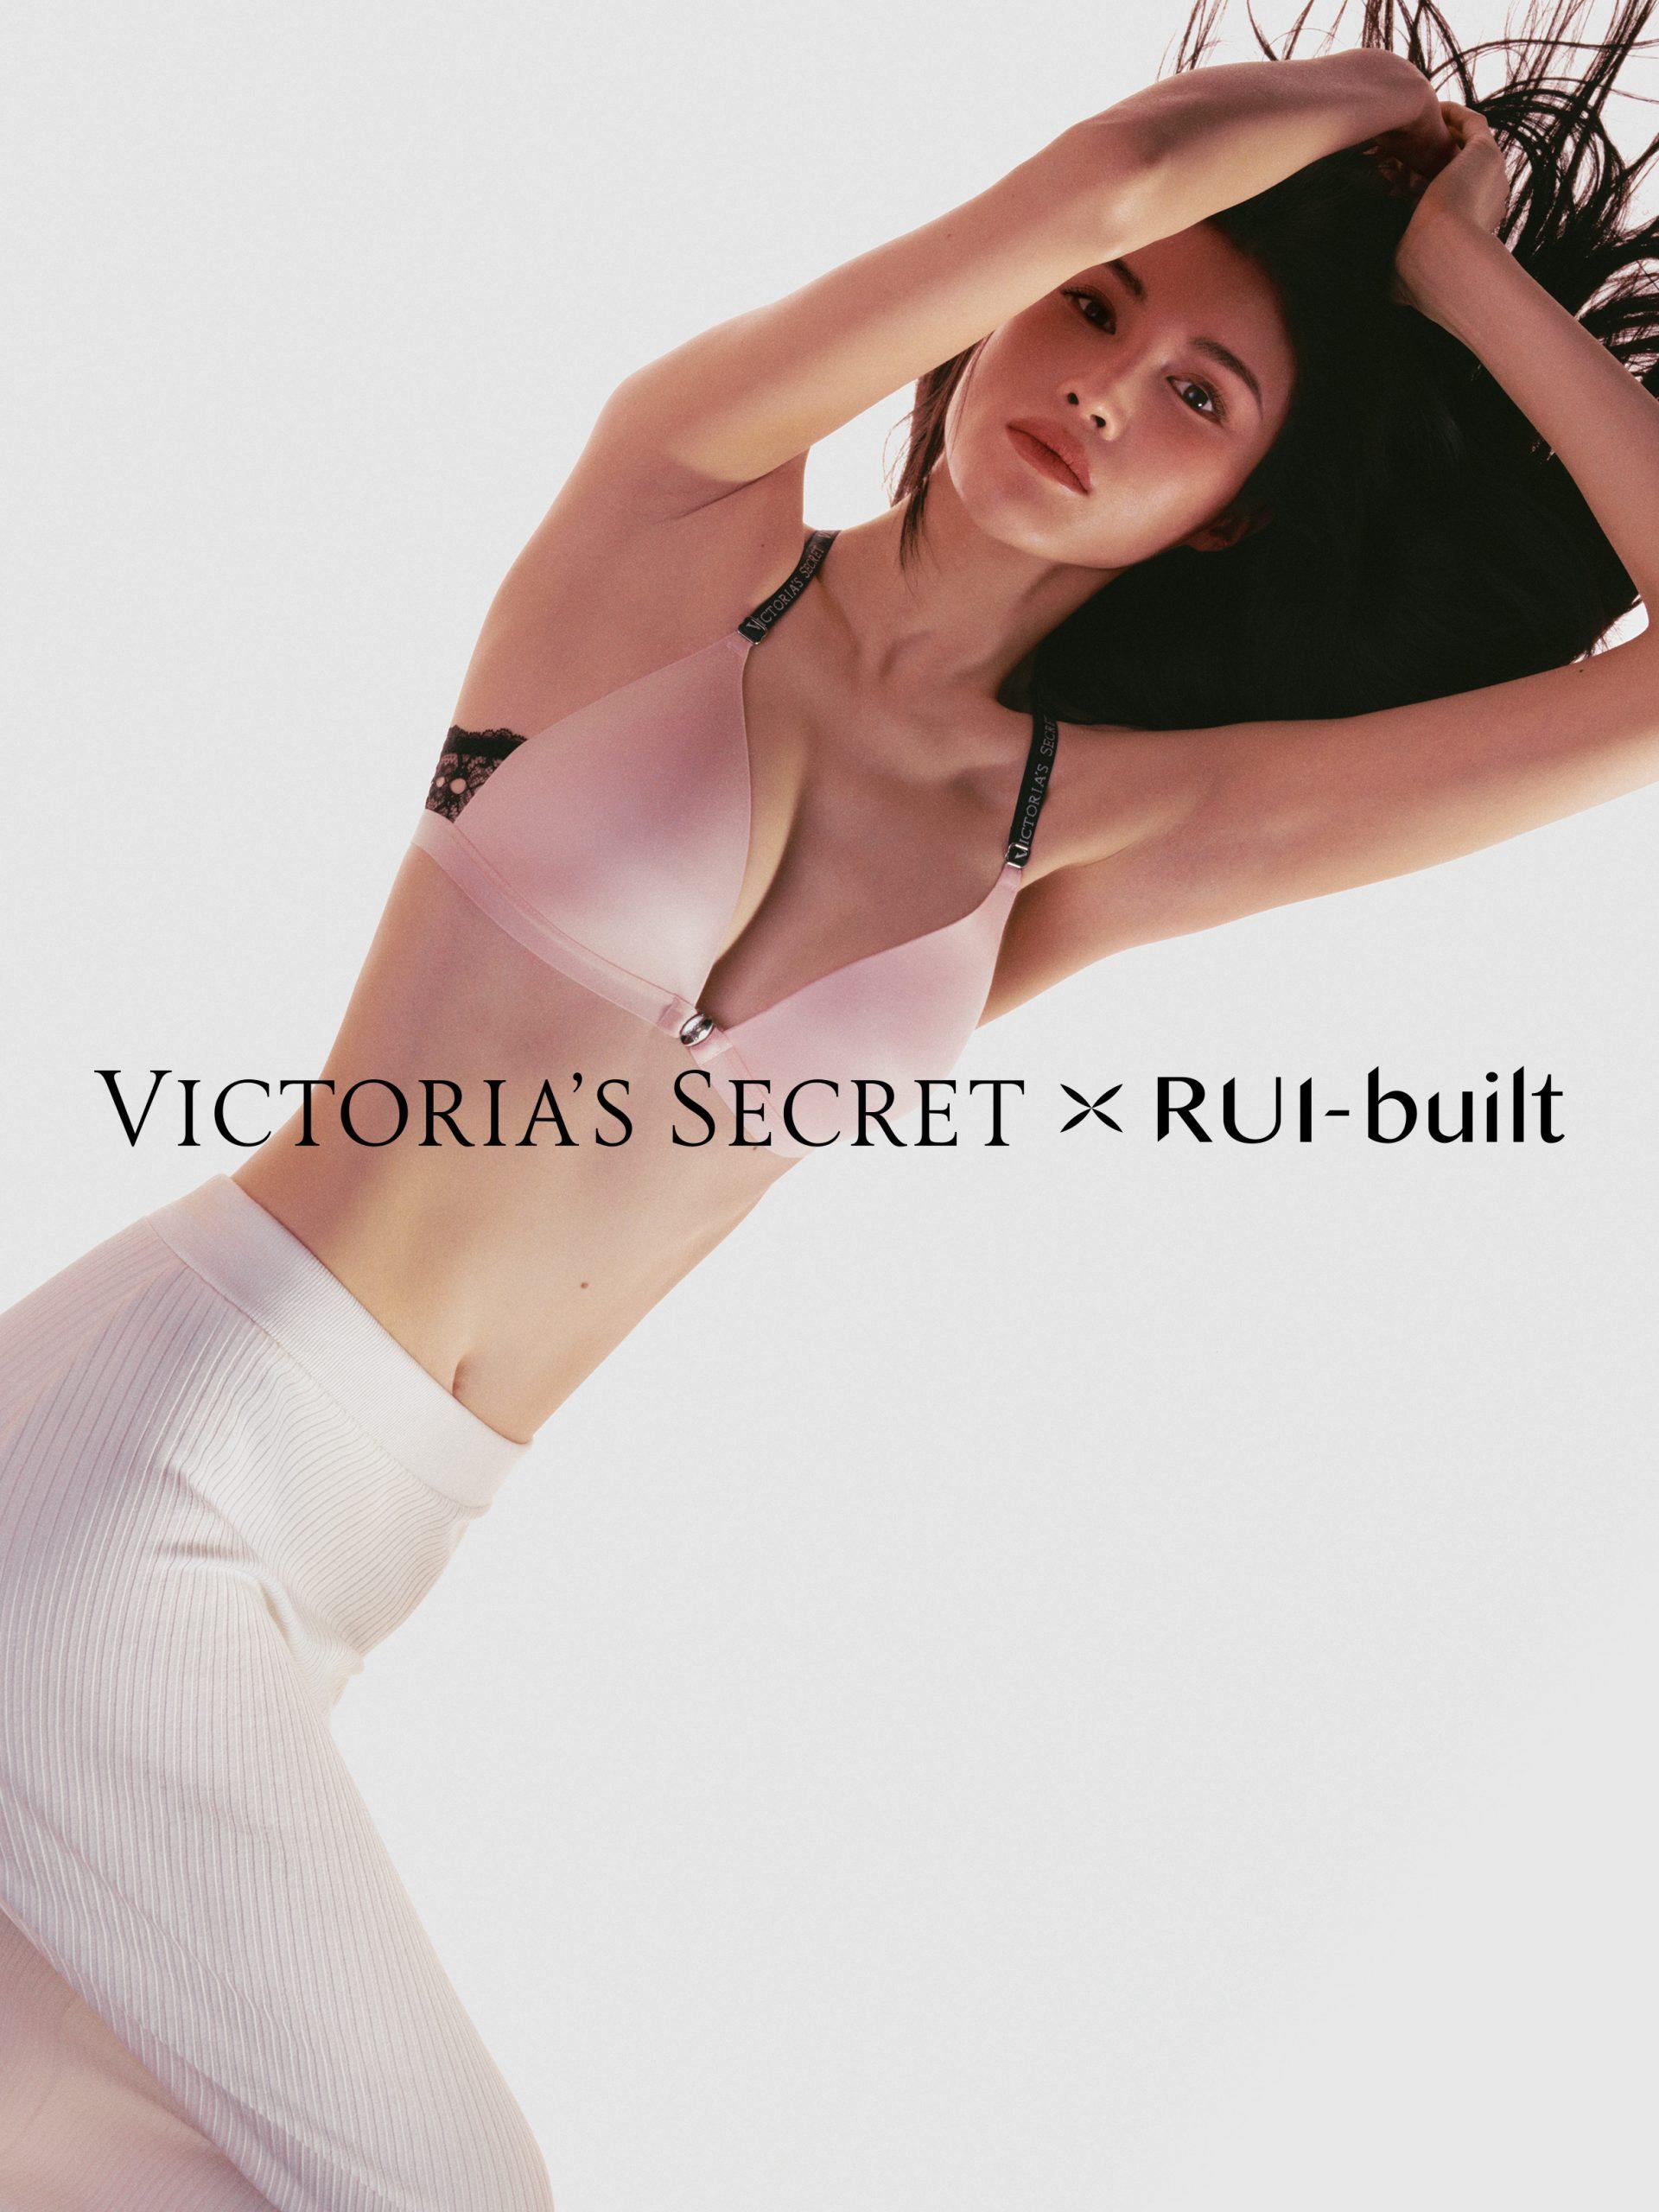 Victoria’s Secret x Rui-Built is the lingerie giant’s first-ever partnership in China. Photos: Handout